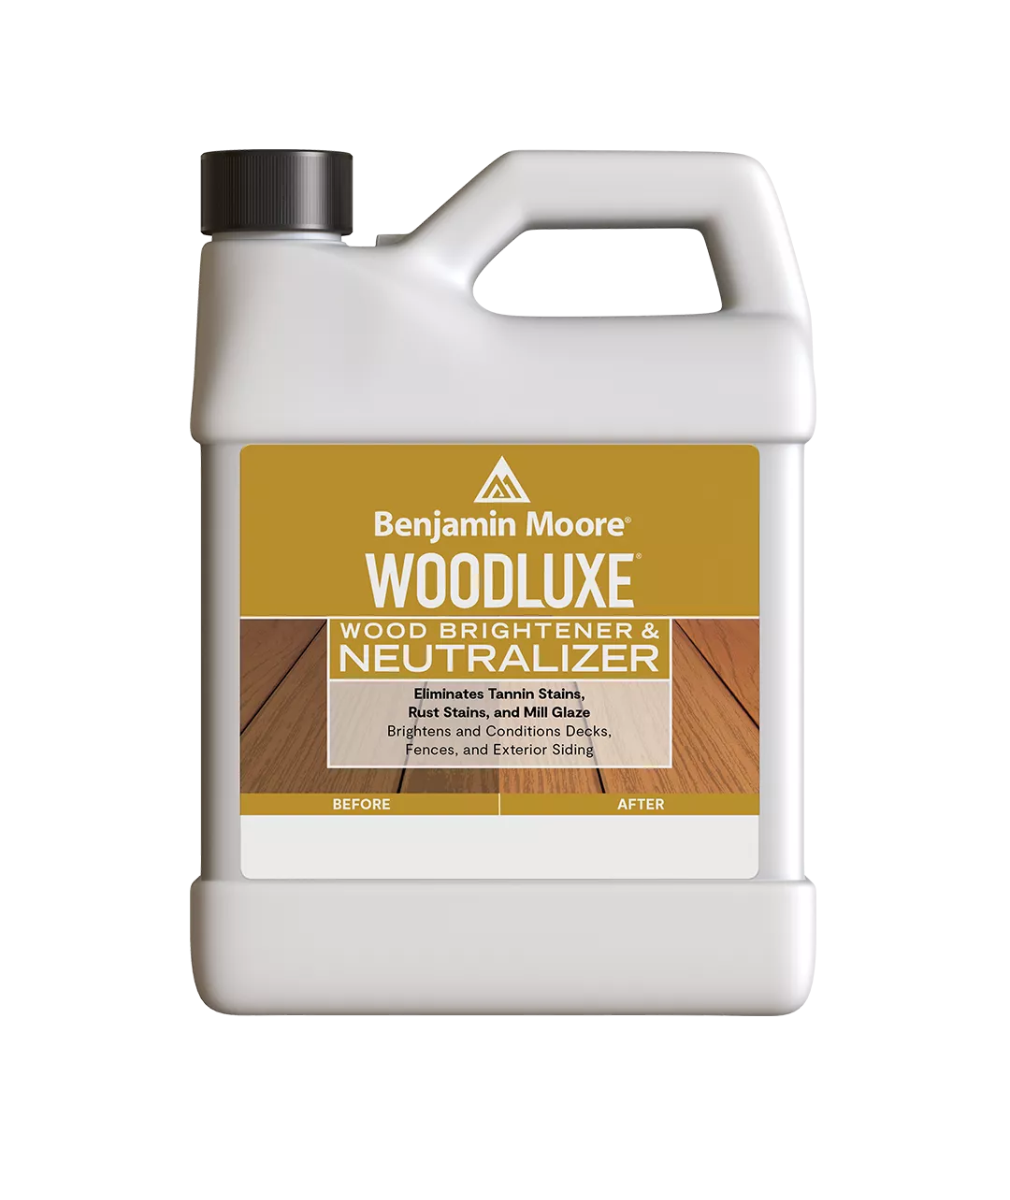 Benjamin Moore Woodluxe Wood Brightener & Neutralizer Gallon available at Clement's Paint in Austin, Texas.